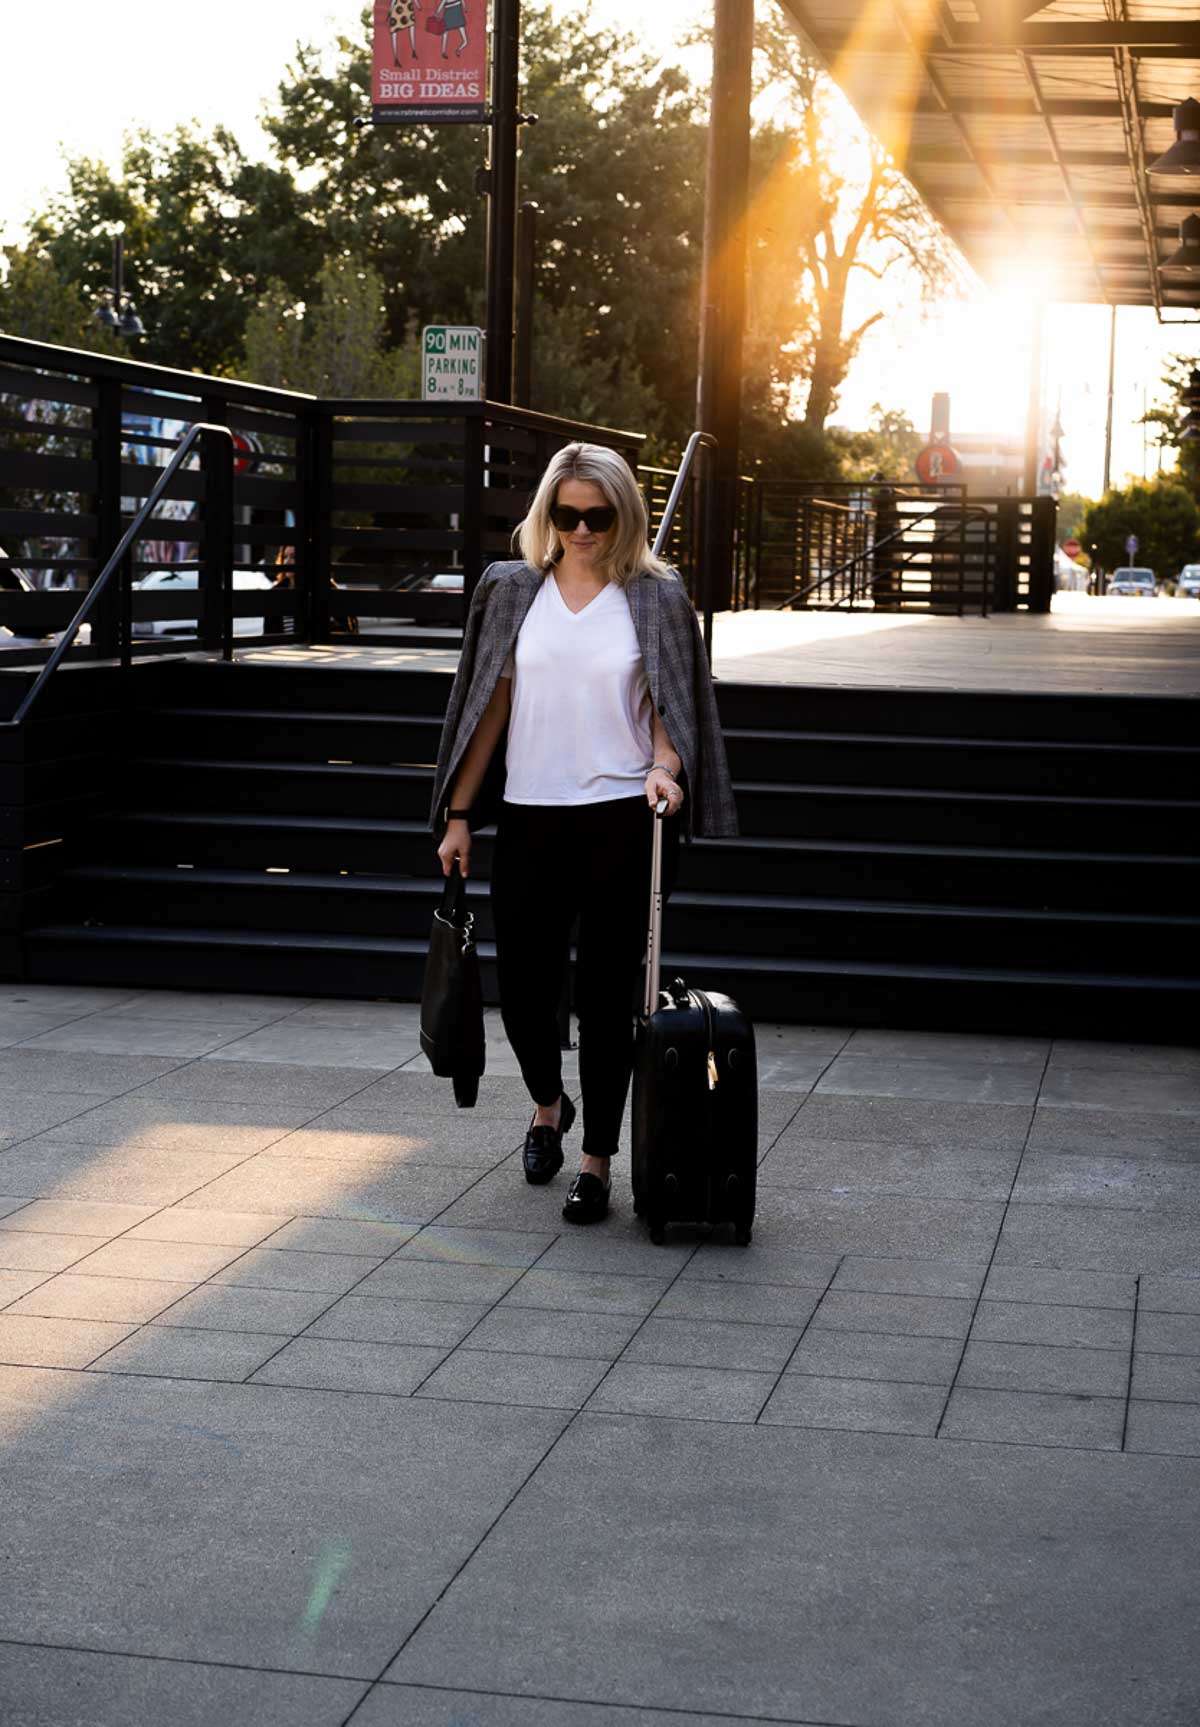 Fall Travel Outfits - White Tee + Jeans - Walking with Spinner Suitcase